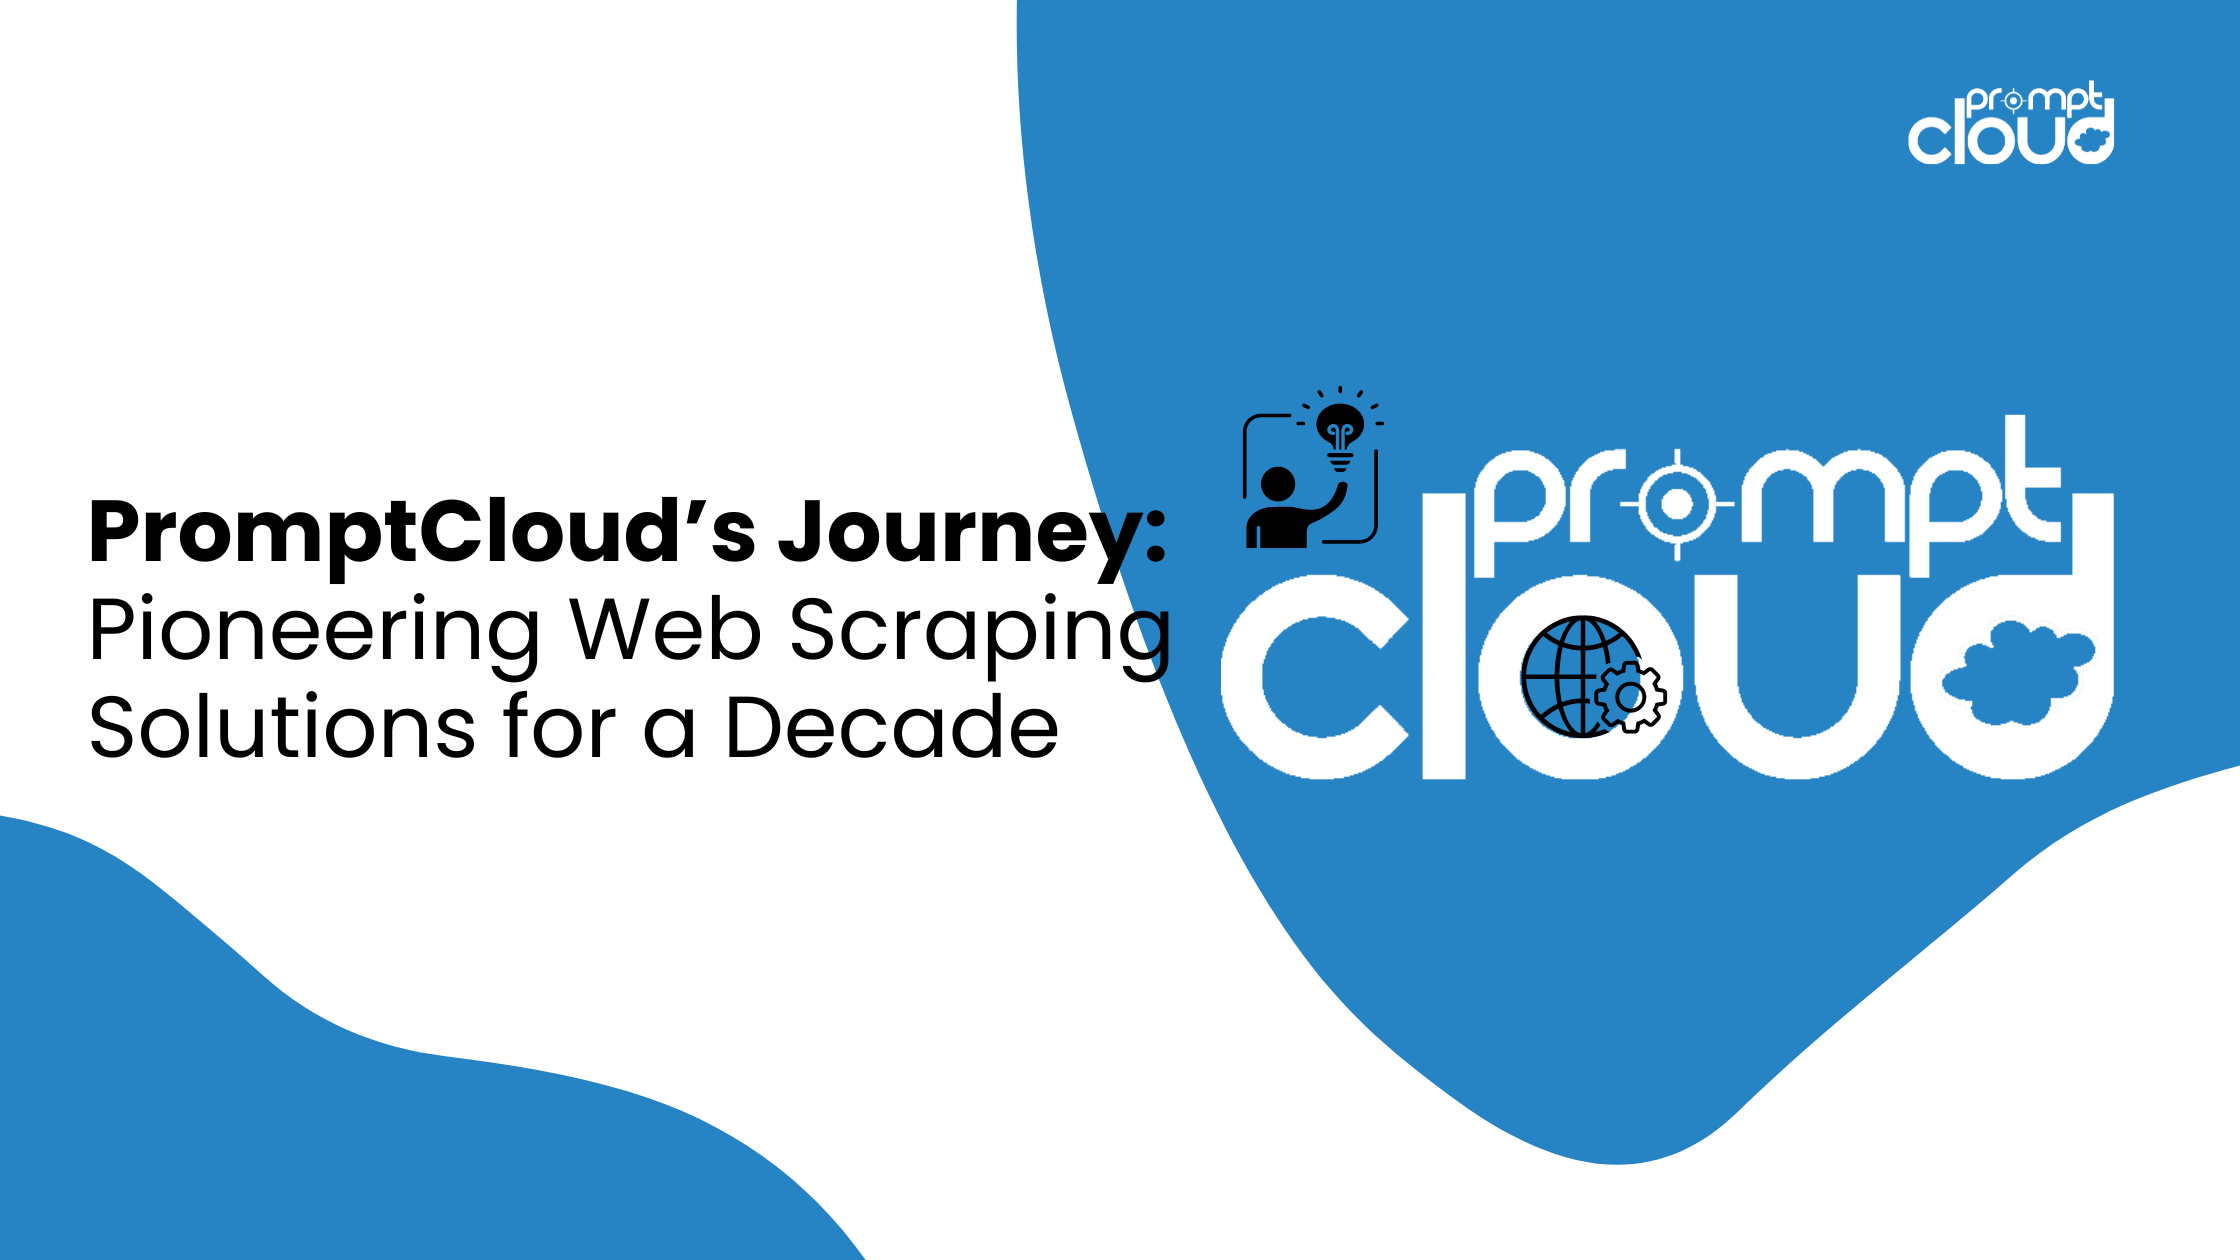 web scraping solutions - PromptCloud